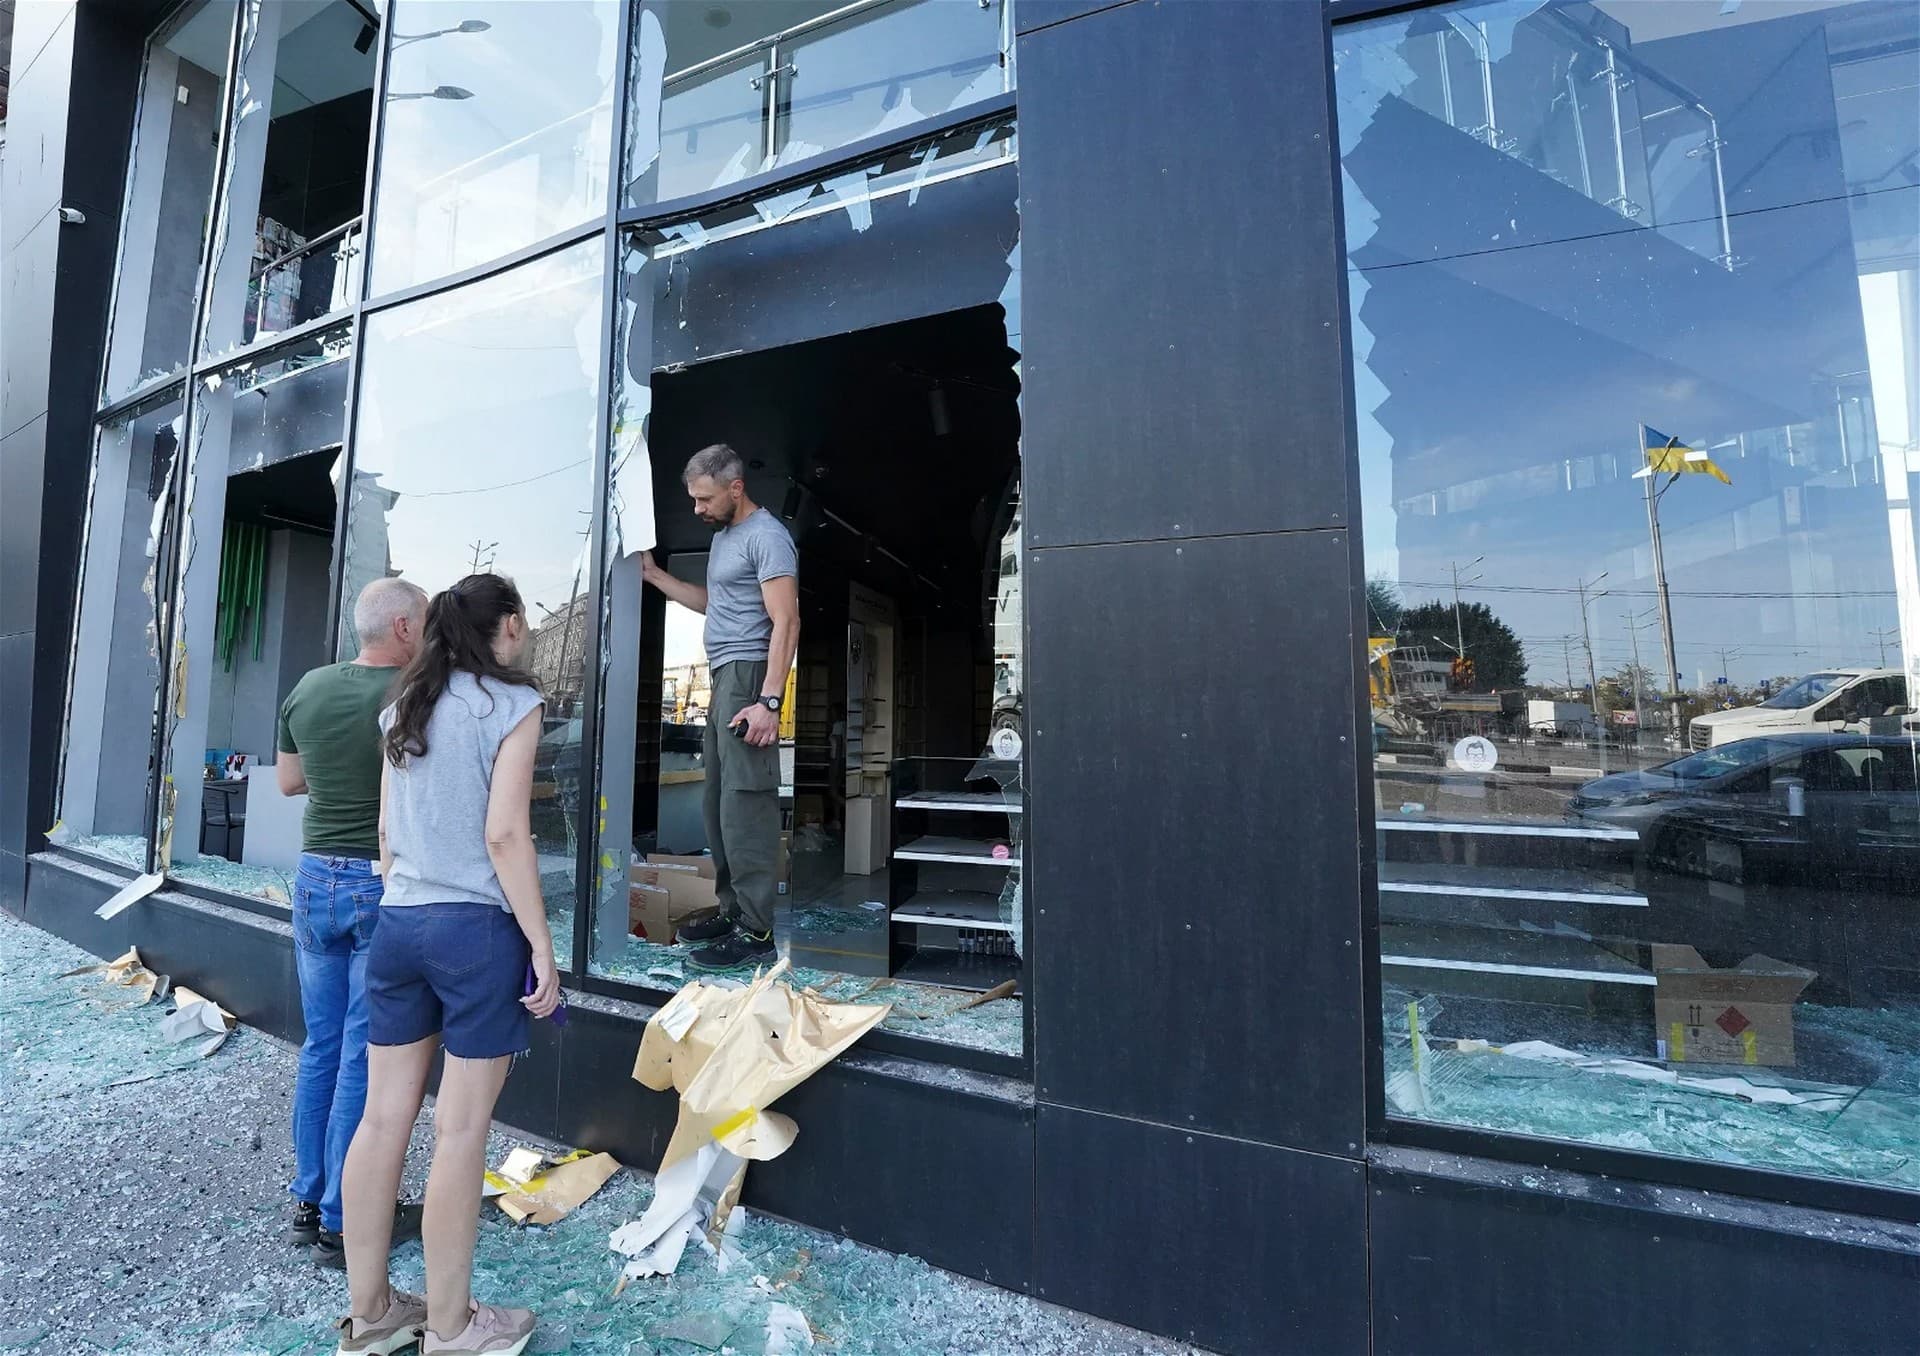 Shop owners inspect broken windows after the night Russian rocket attack in downtown Kharkiv